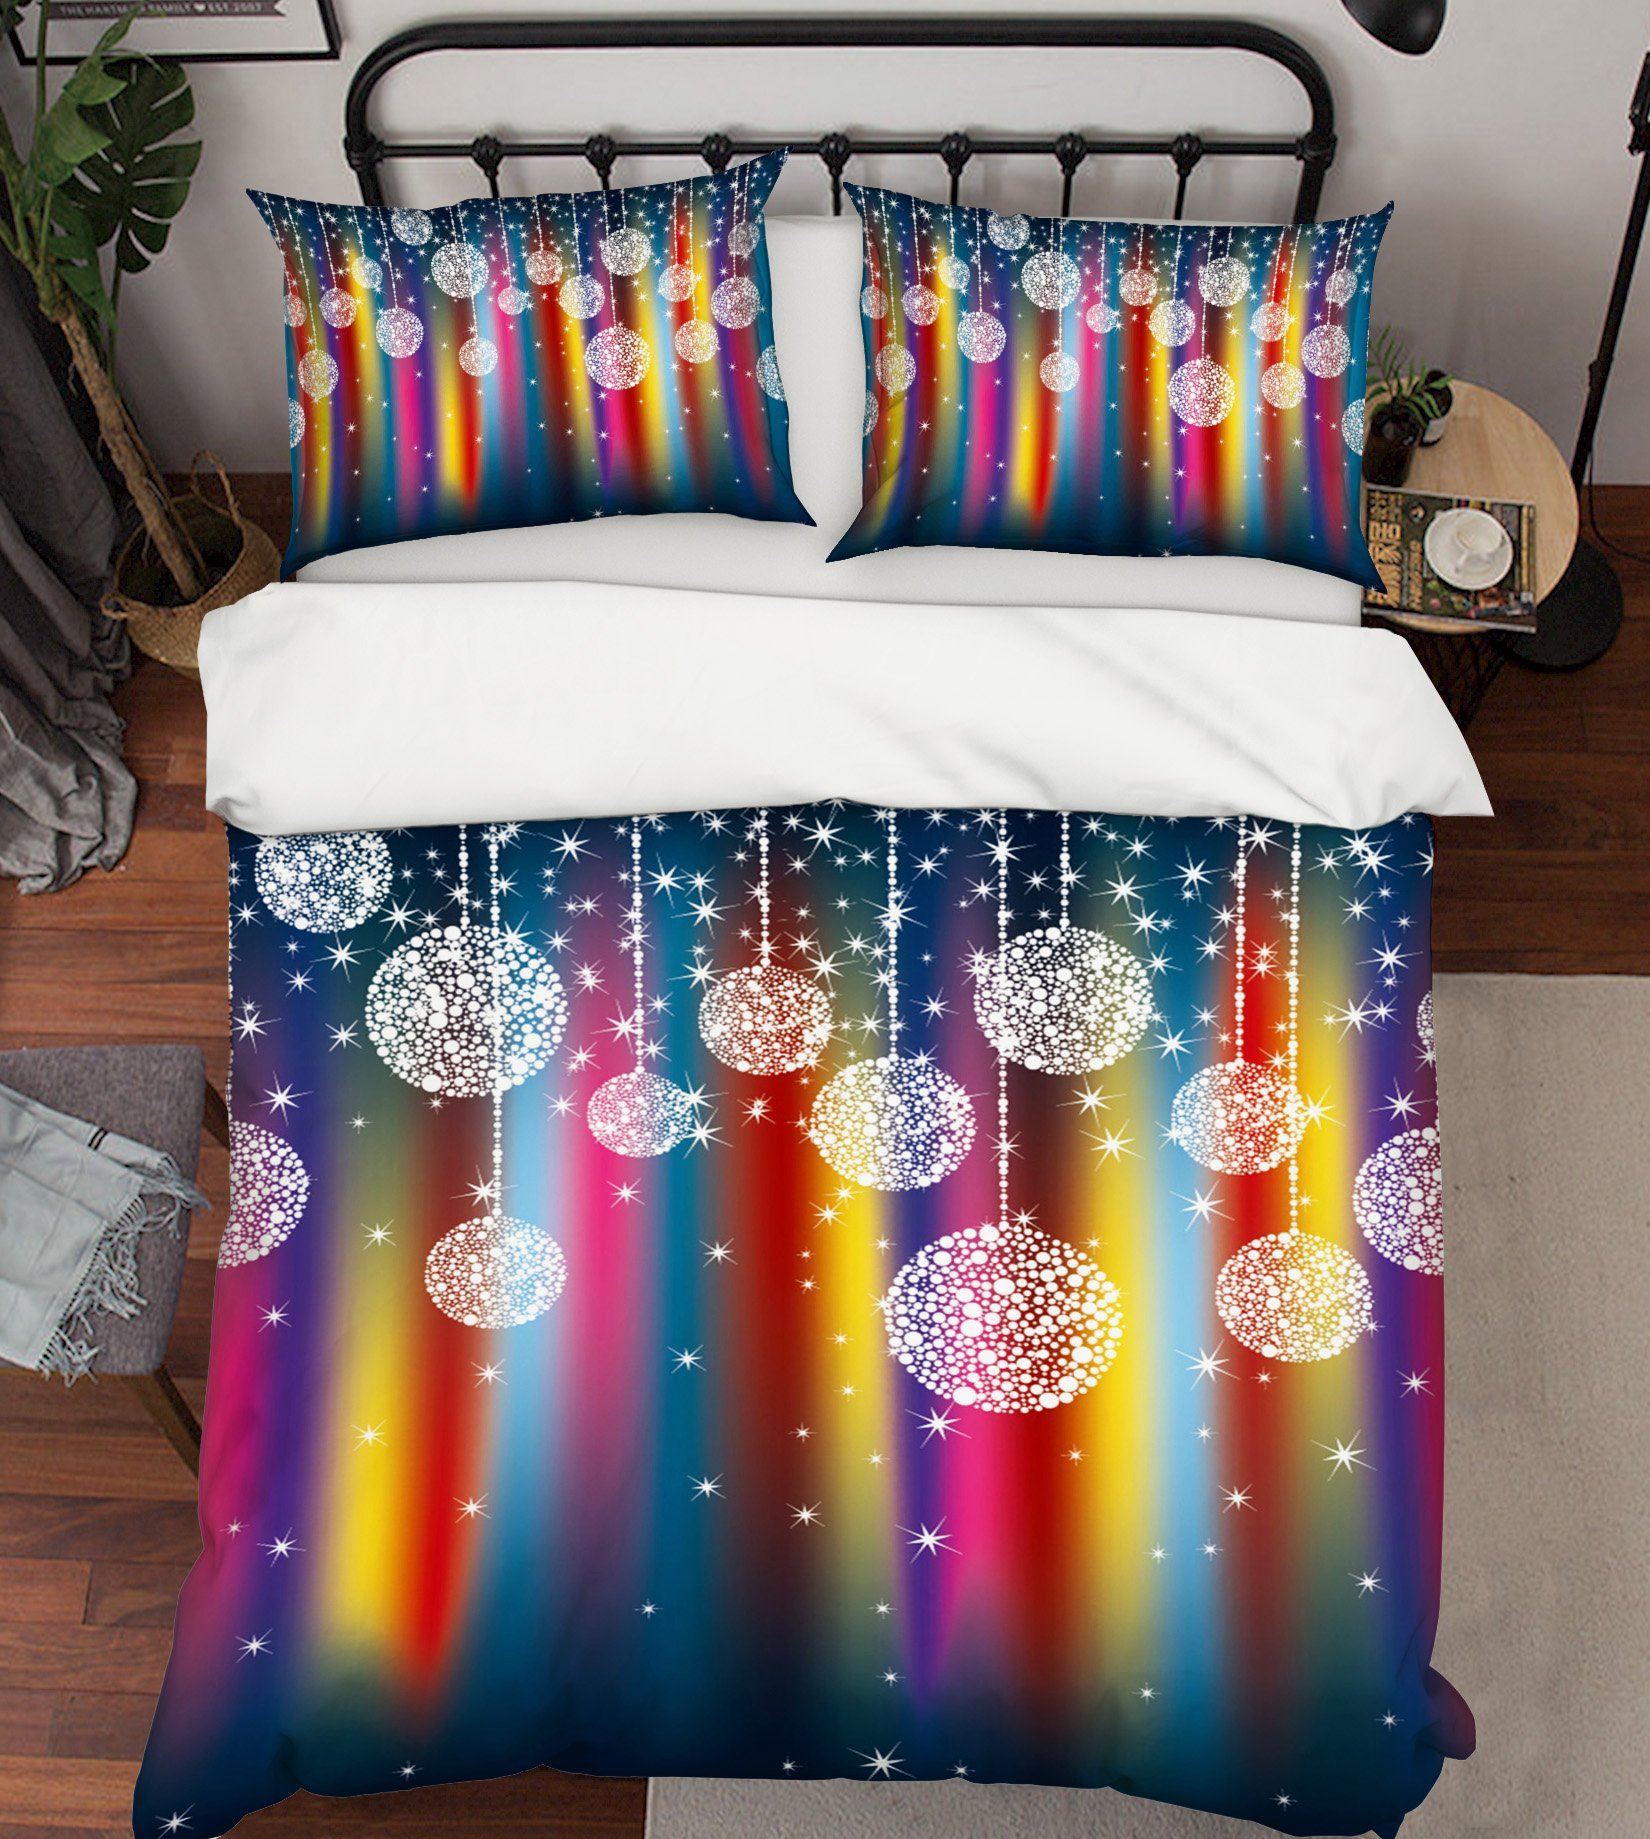 3D Colorful Crystal Ornaments 36 Bed Pillowcases Quilt Quiet Covers AJ Creativity Home 